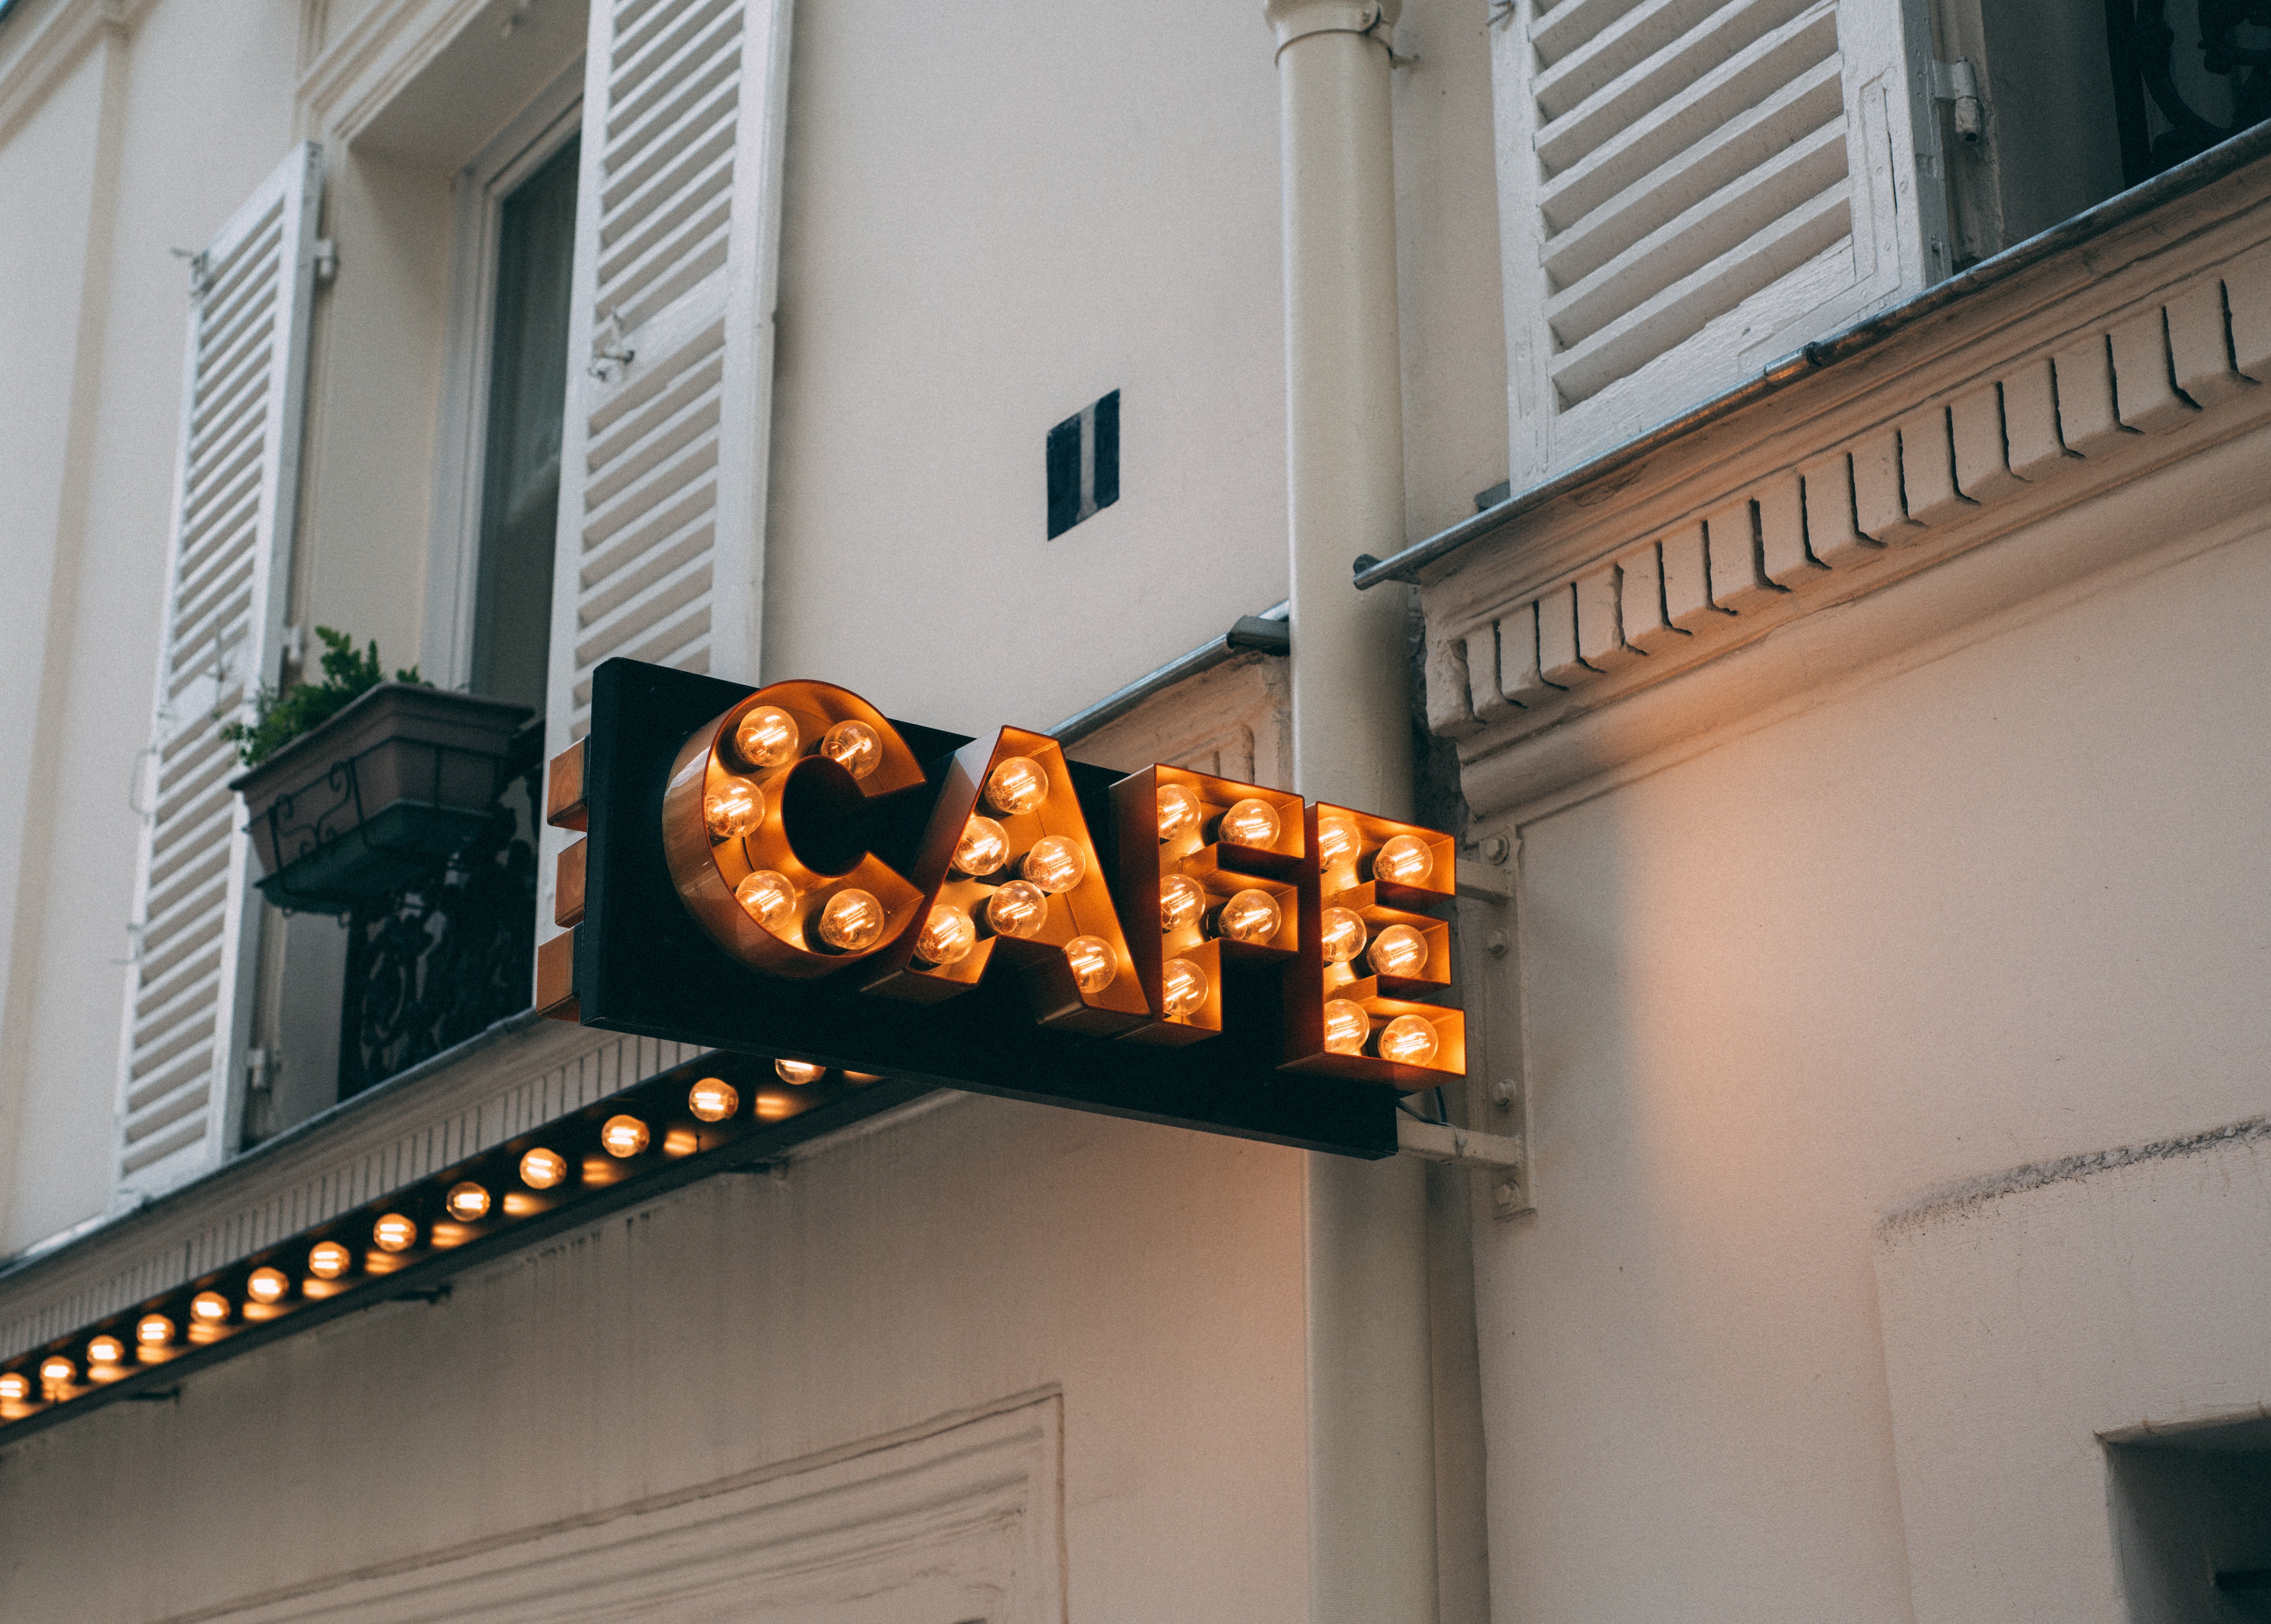 Elizabeth visited the café which Tom told her needed cleaning services and there she met Mr. Olsen, the owner. | Source: Pexels